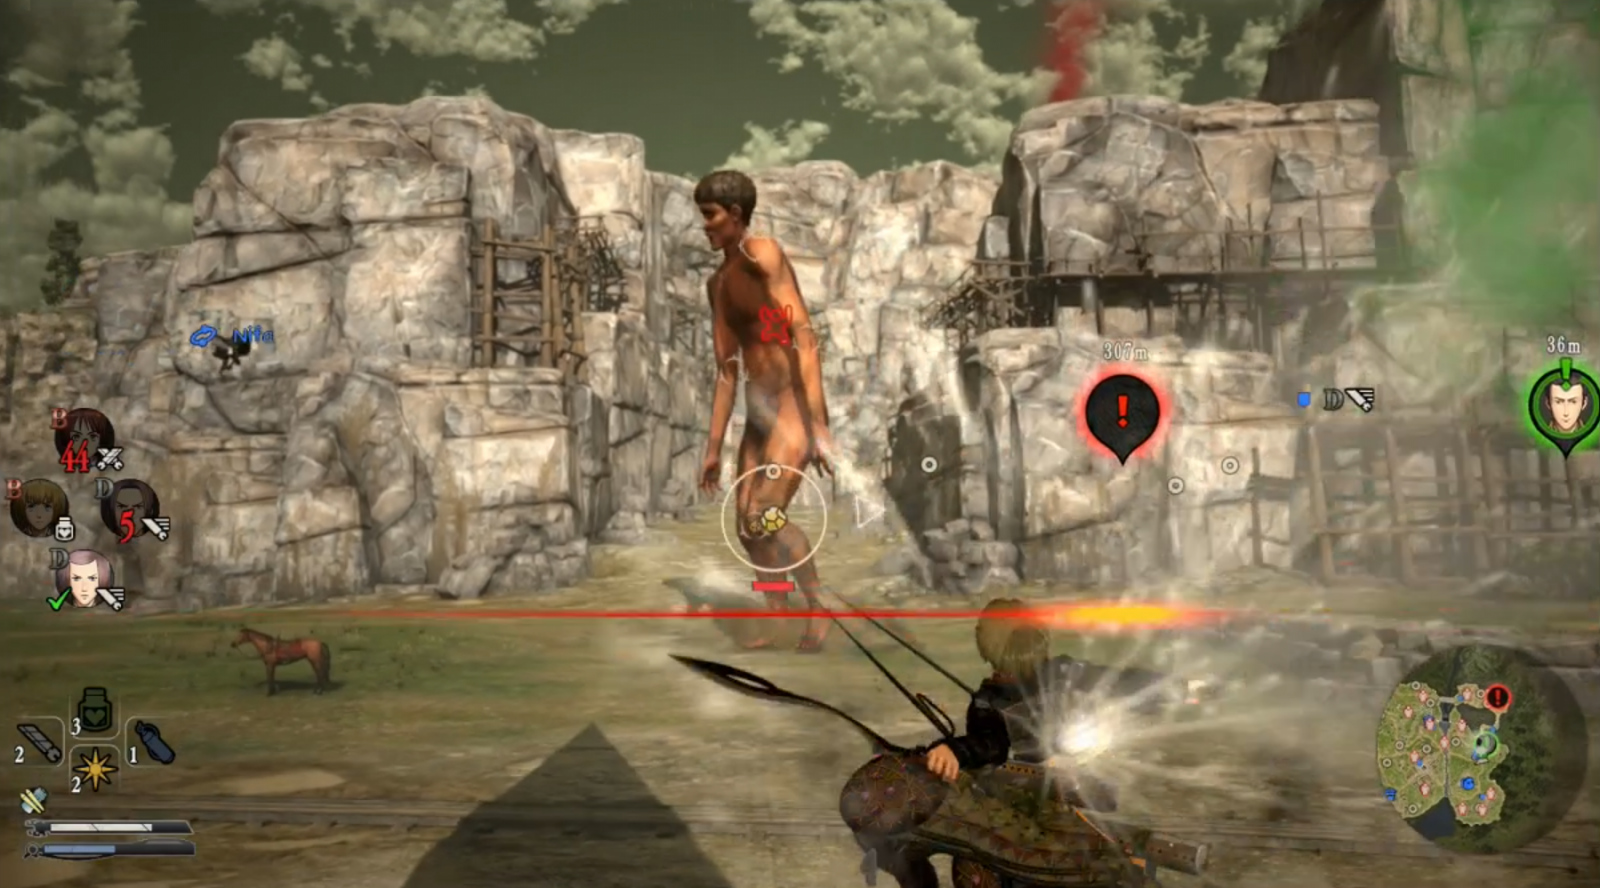 attack on titan game play now